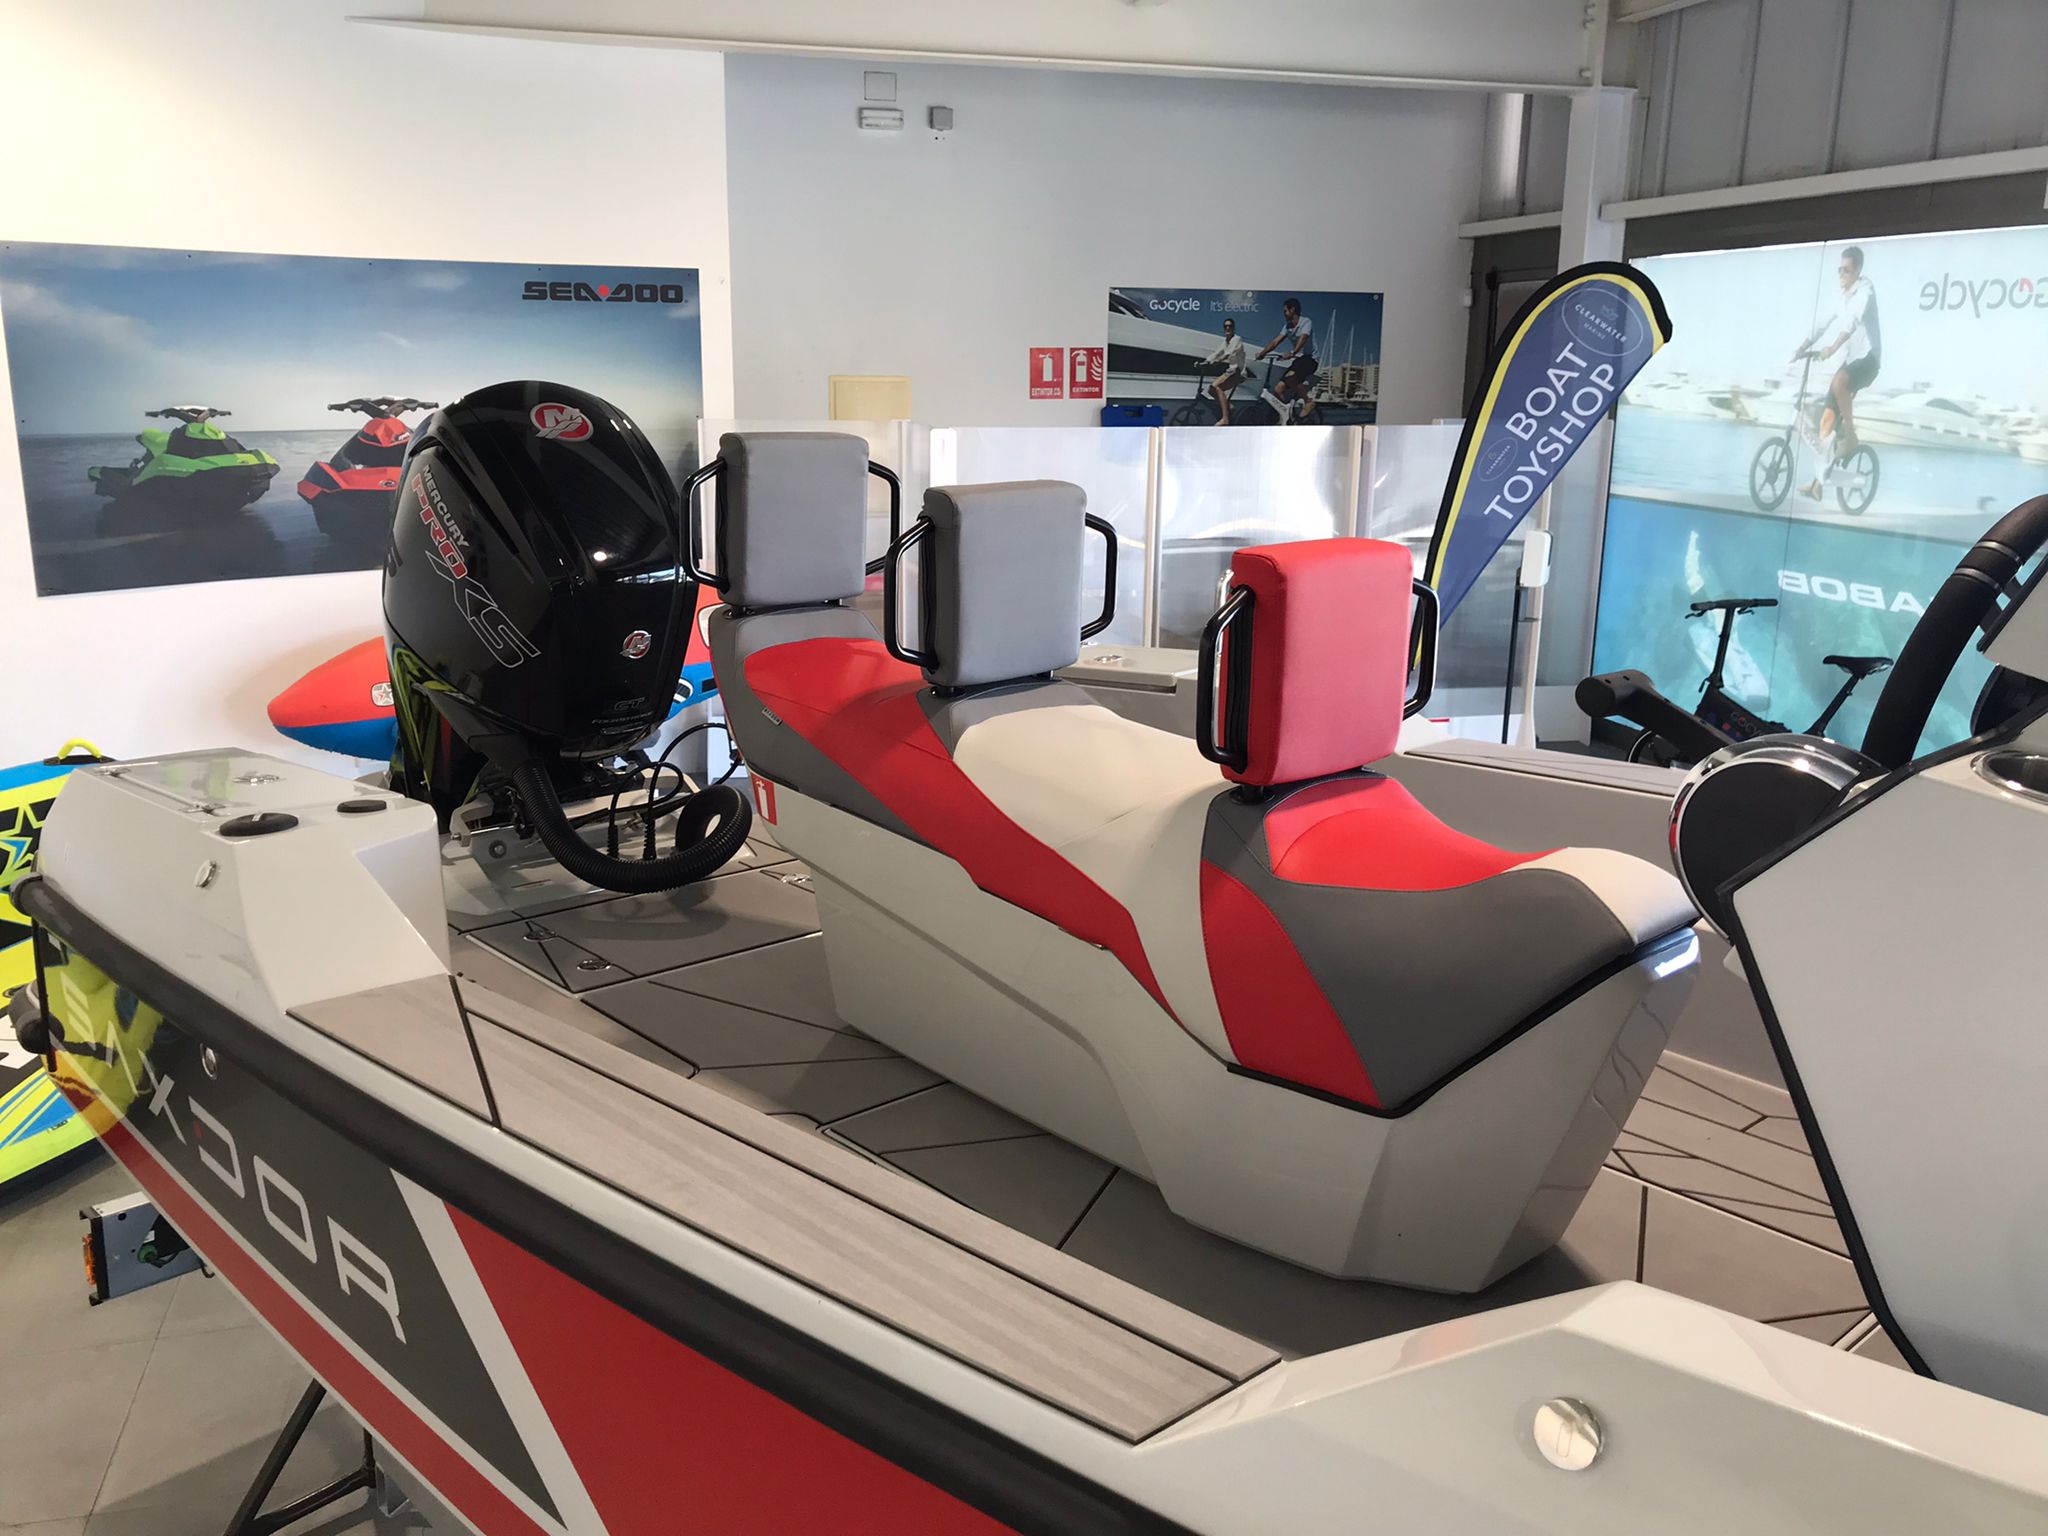 New 2021 Saxdor 200 Sport for sale in Menorca - Clearwater Marine